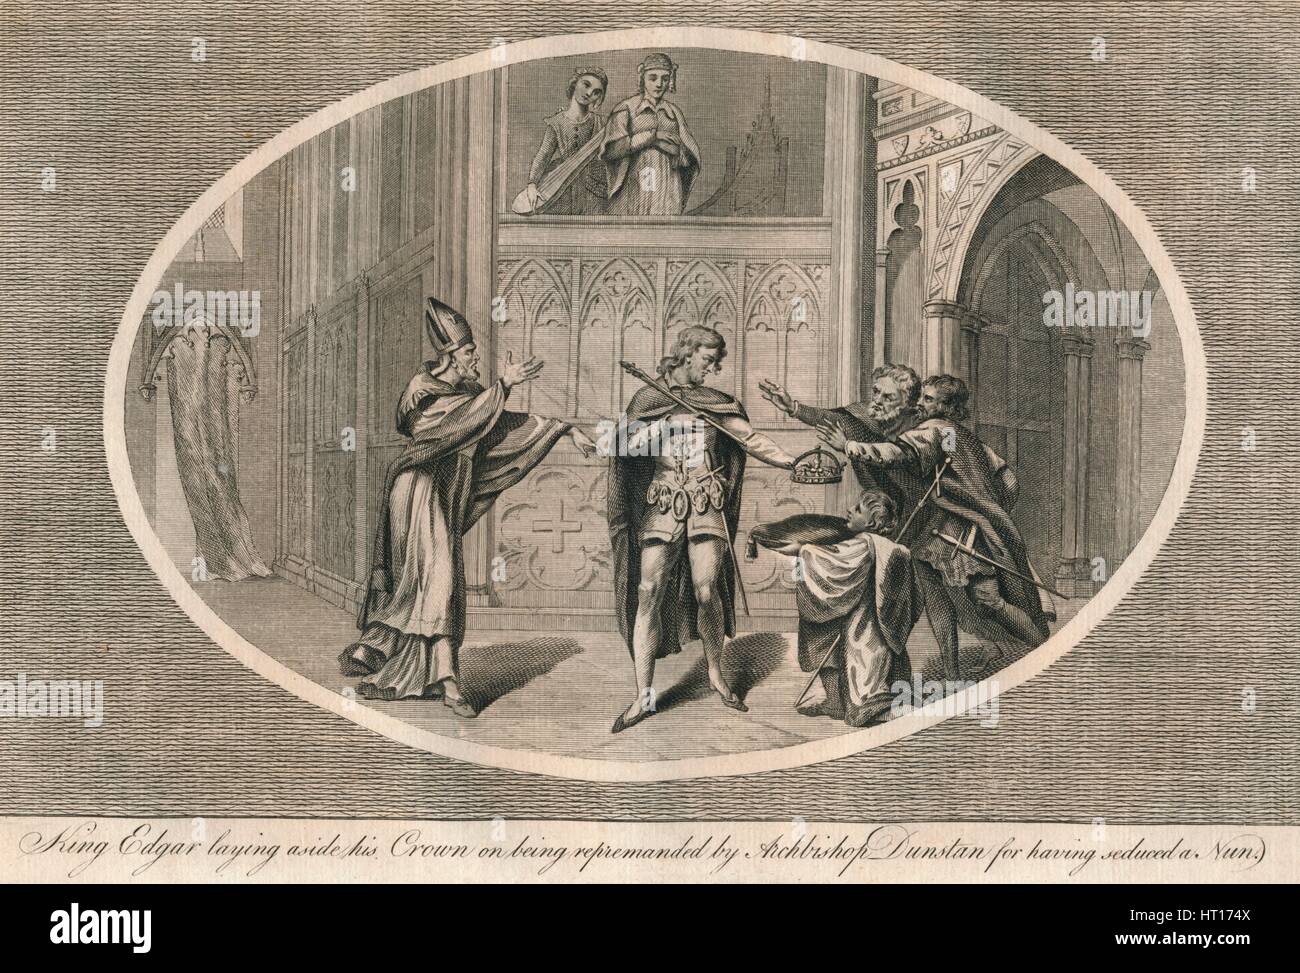 King Edgar laying aside his crown on being repremanded by Archbishop Dunstan, c960s (1793). Artist: Unknown. Stock Photo